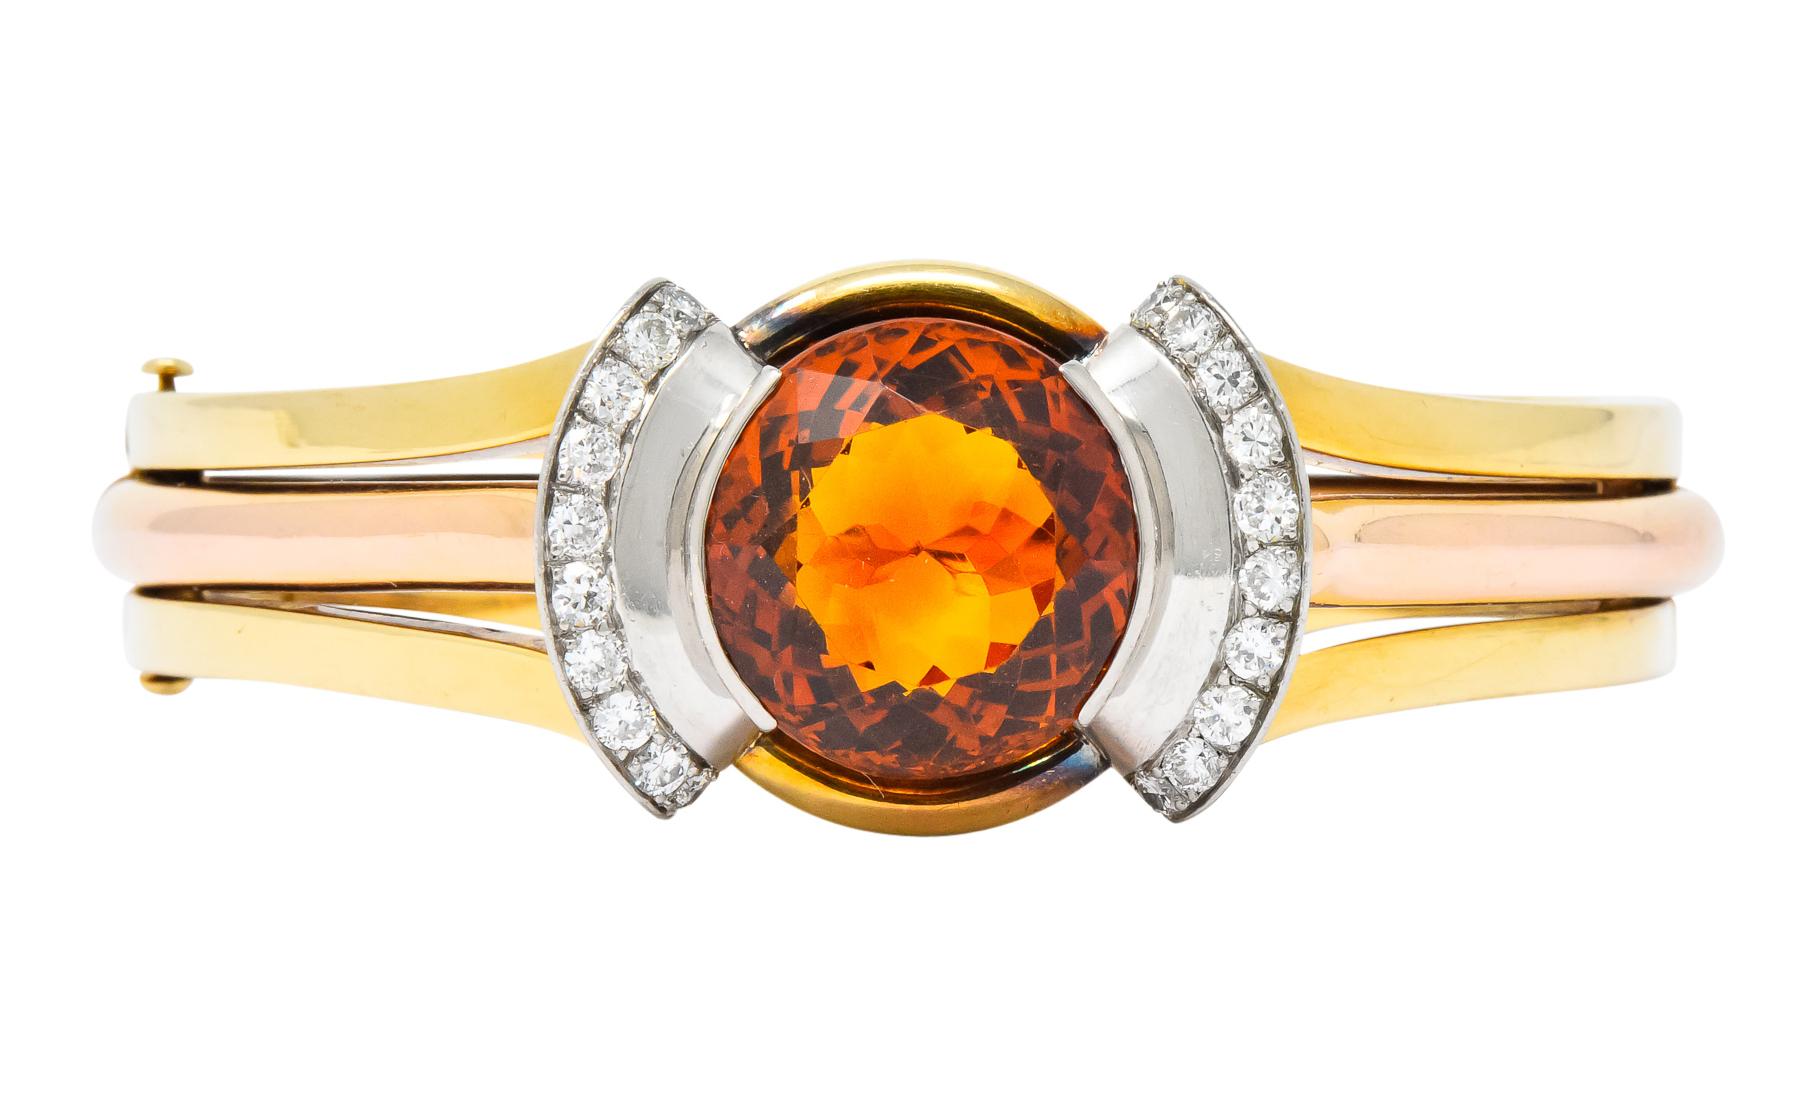 Centering a round mixed cut citrine measuring approximately 17.0 mm, transparent medium-dark brownish-orange

Half bezel set in flared platinum mounting with bead set with round brilliant cut diamonds weighing approximately 0.60 carat total, H/I